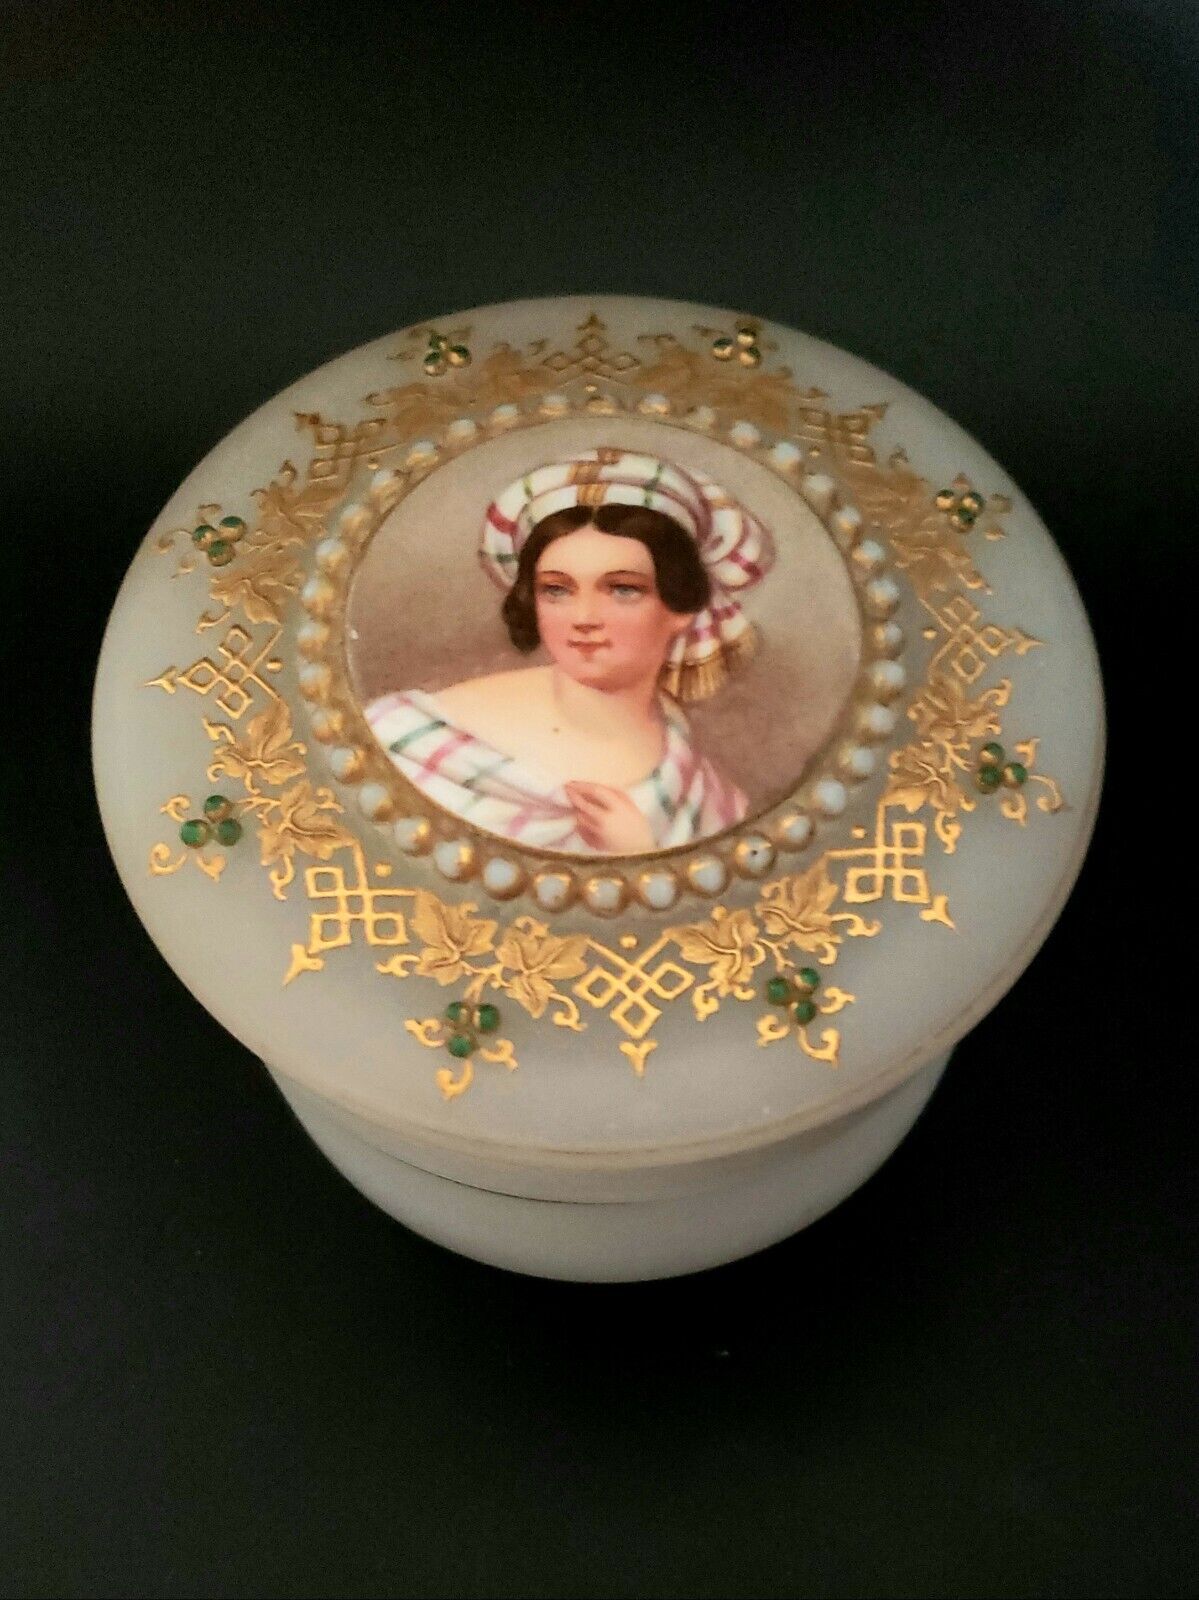 RARE Antique FRENCH Opaline Glass Jewelry BOX w Woman Portrait Hand Painted 19C.